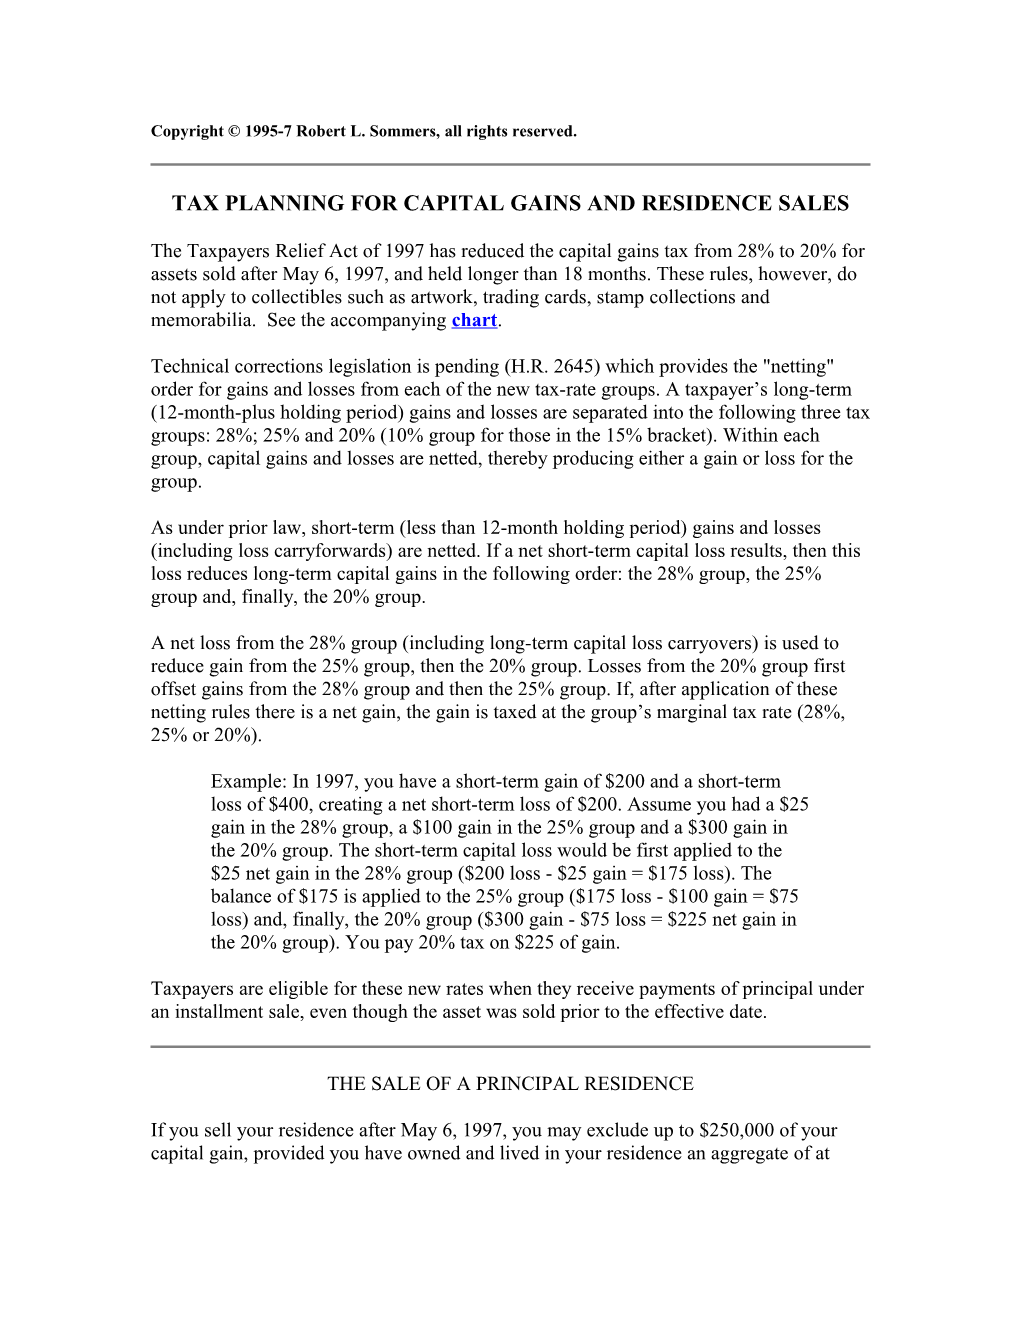 Tax Planning for Capital Gains and Residence Sales